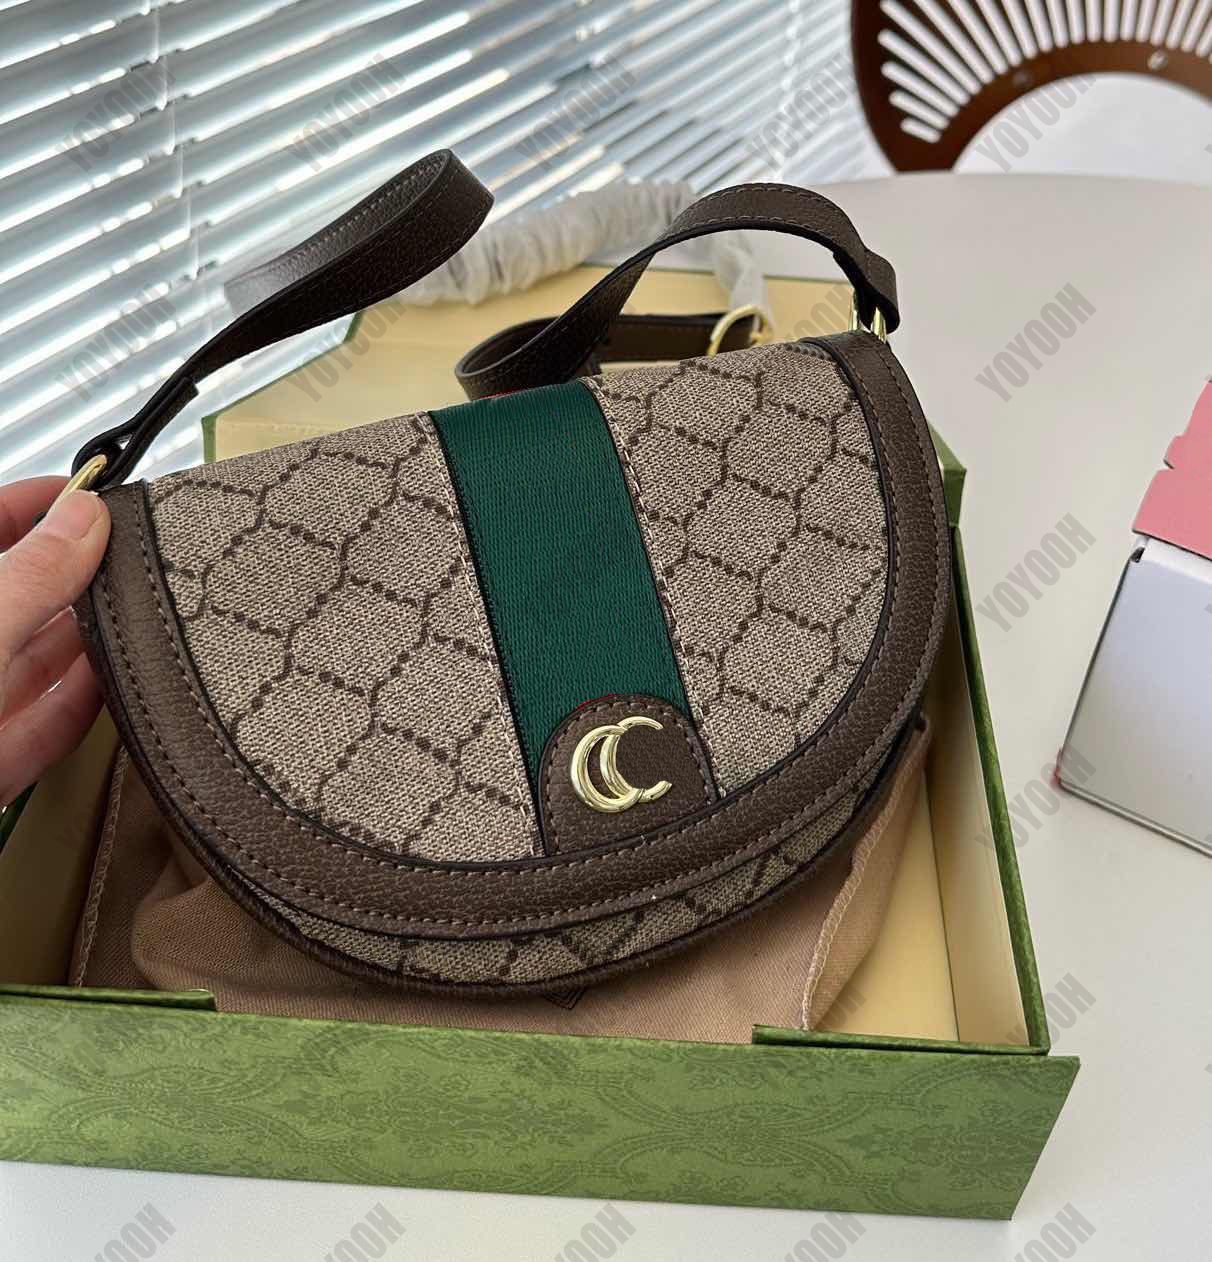 Anyone know any DHgate sellers that sell Gucci messenger bags that